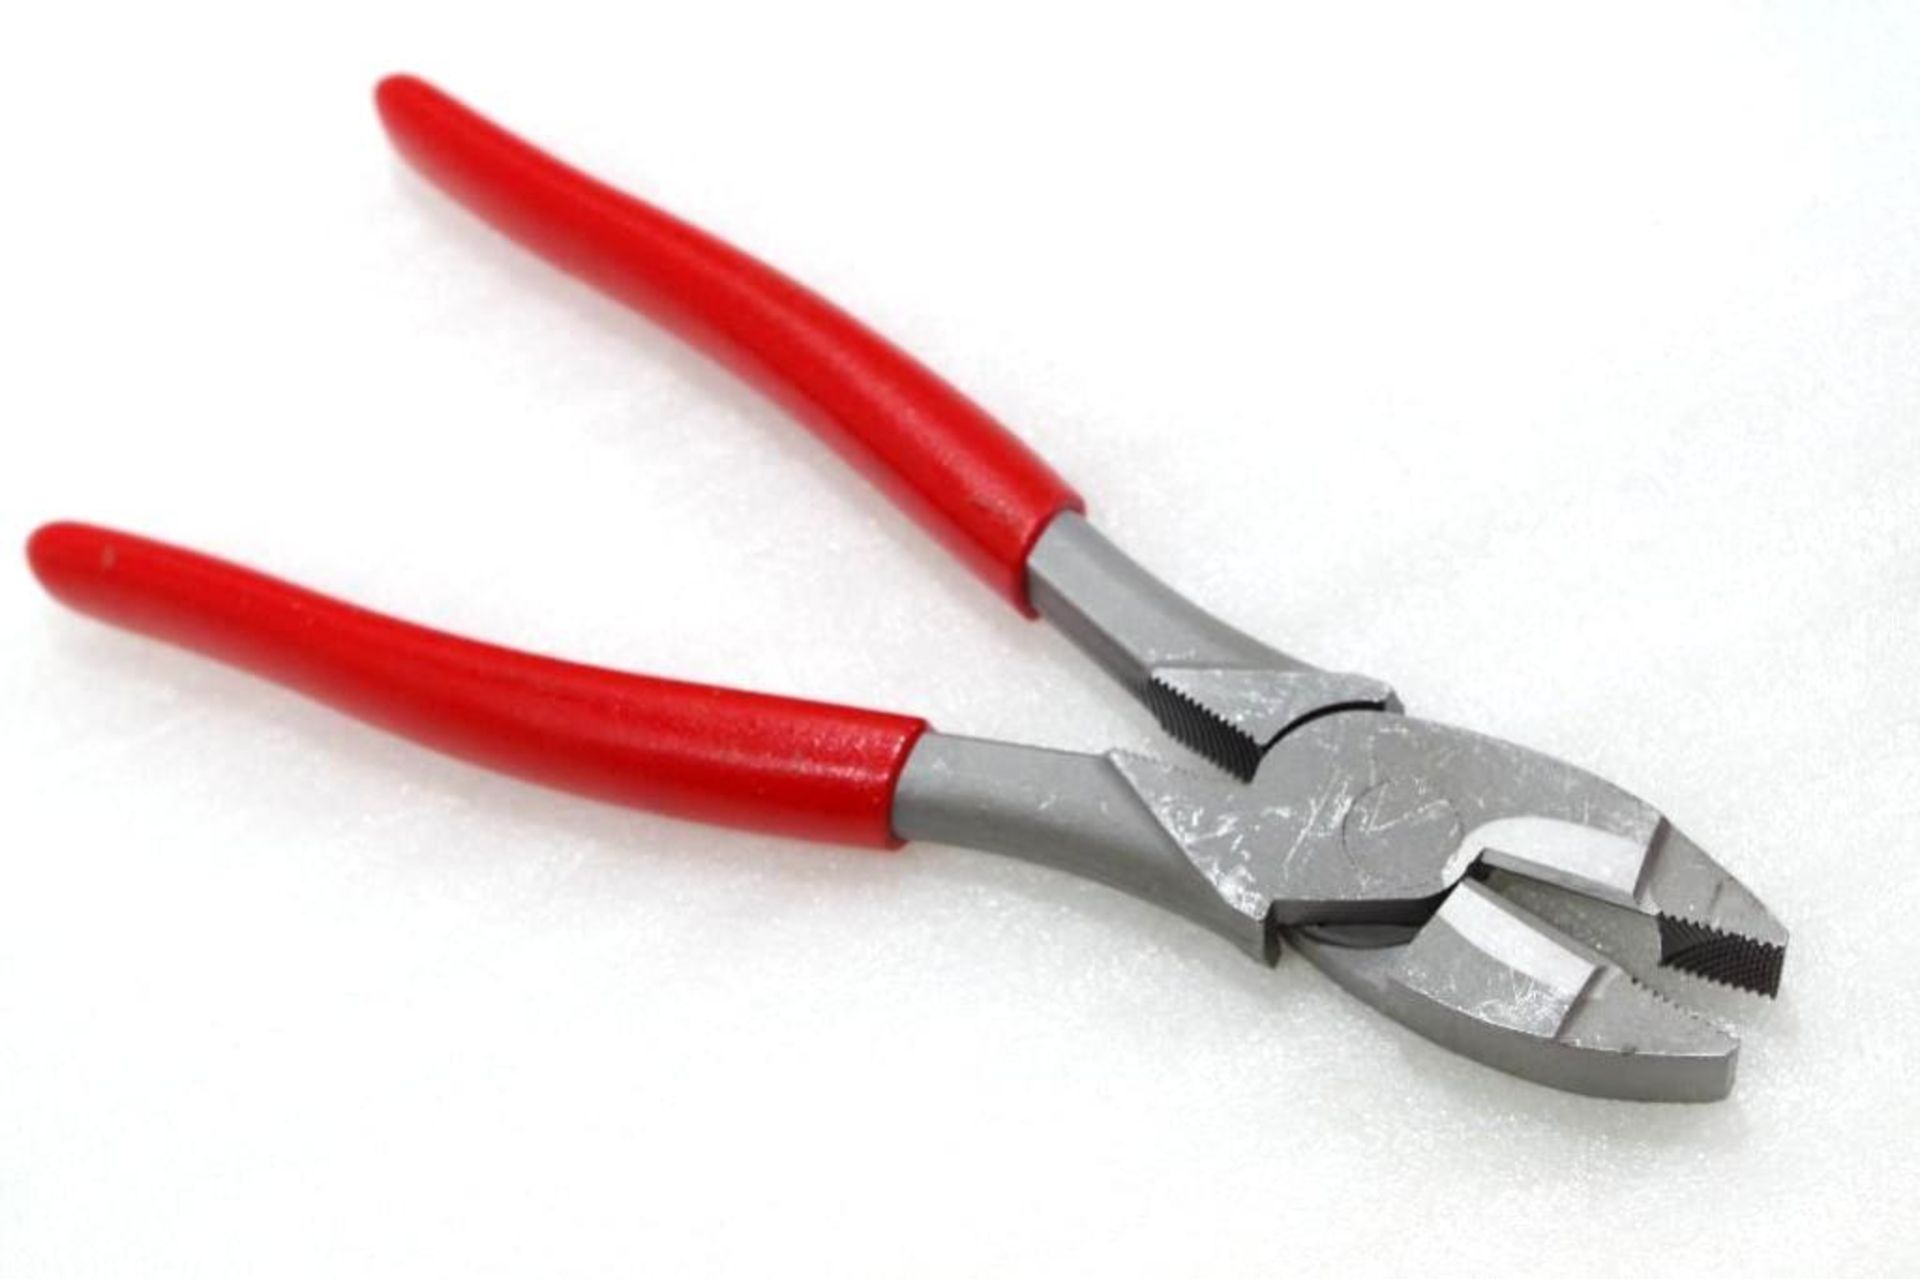 NEW SNAP-ON Lineman's Pliers, Made in USA M/N 59AHLP - Image 3 of 3